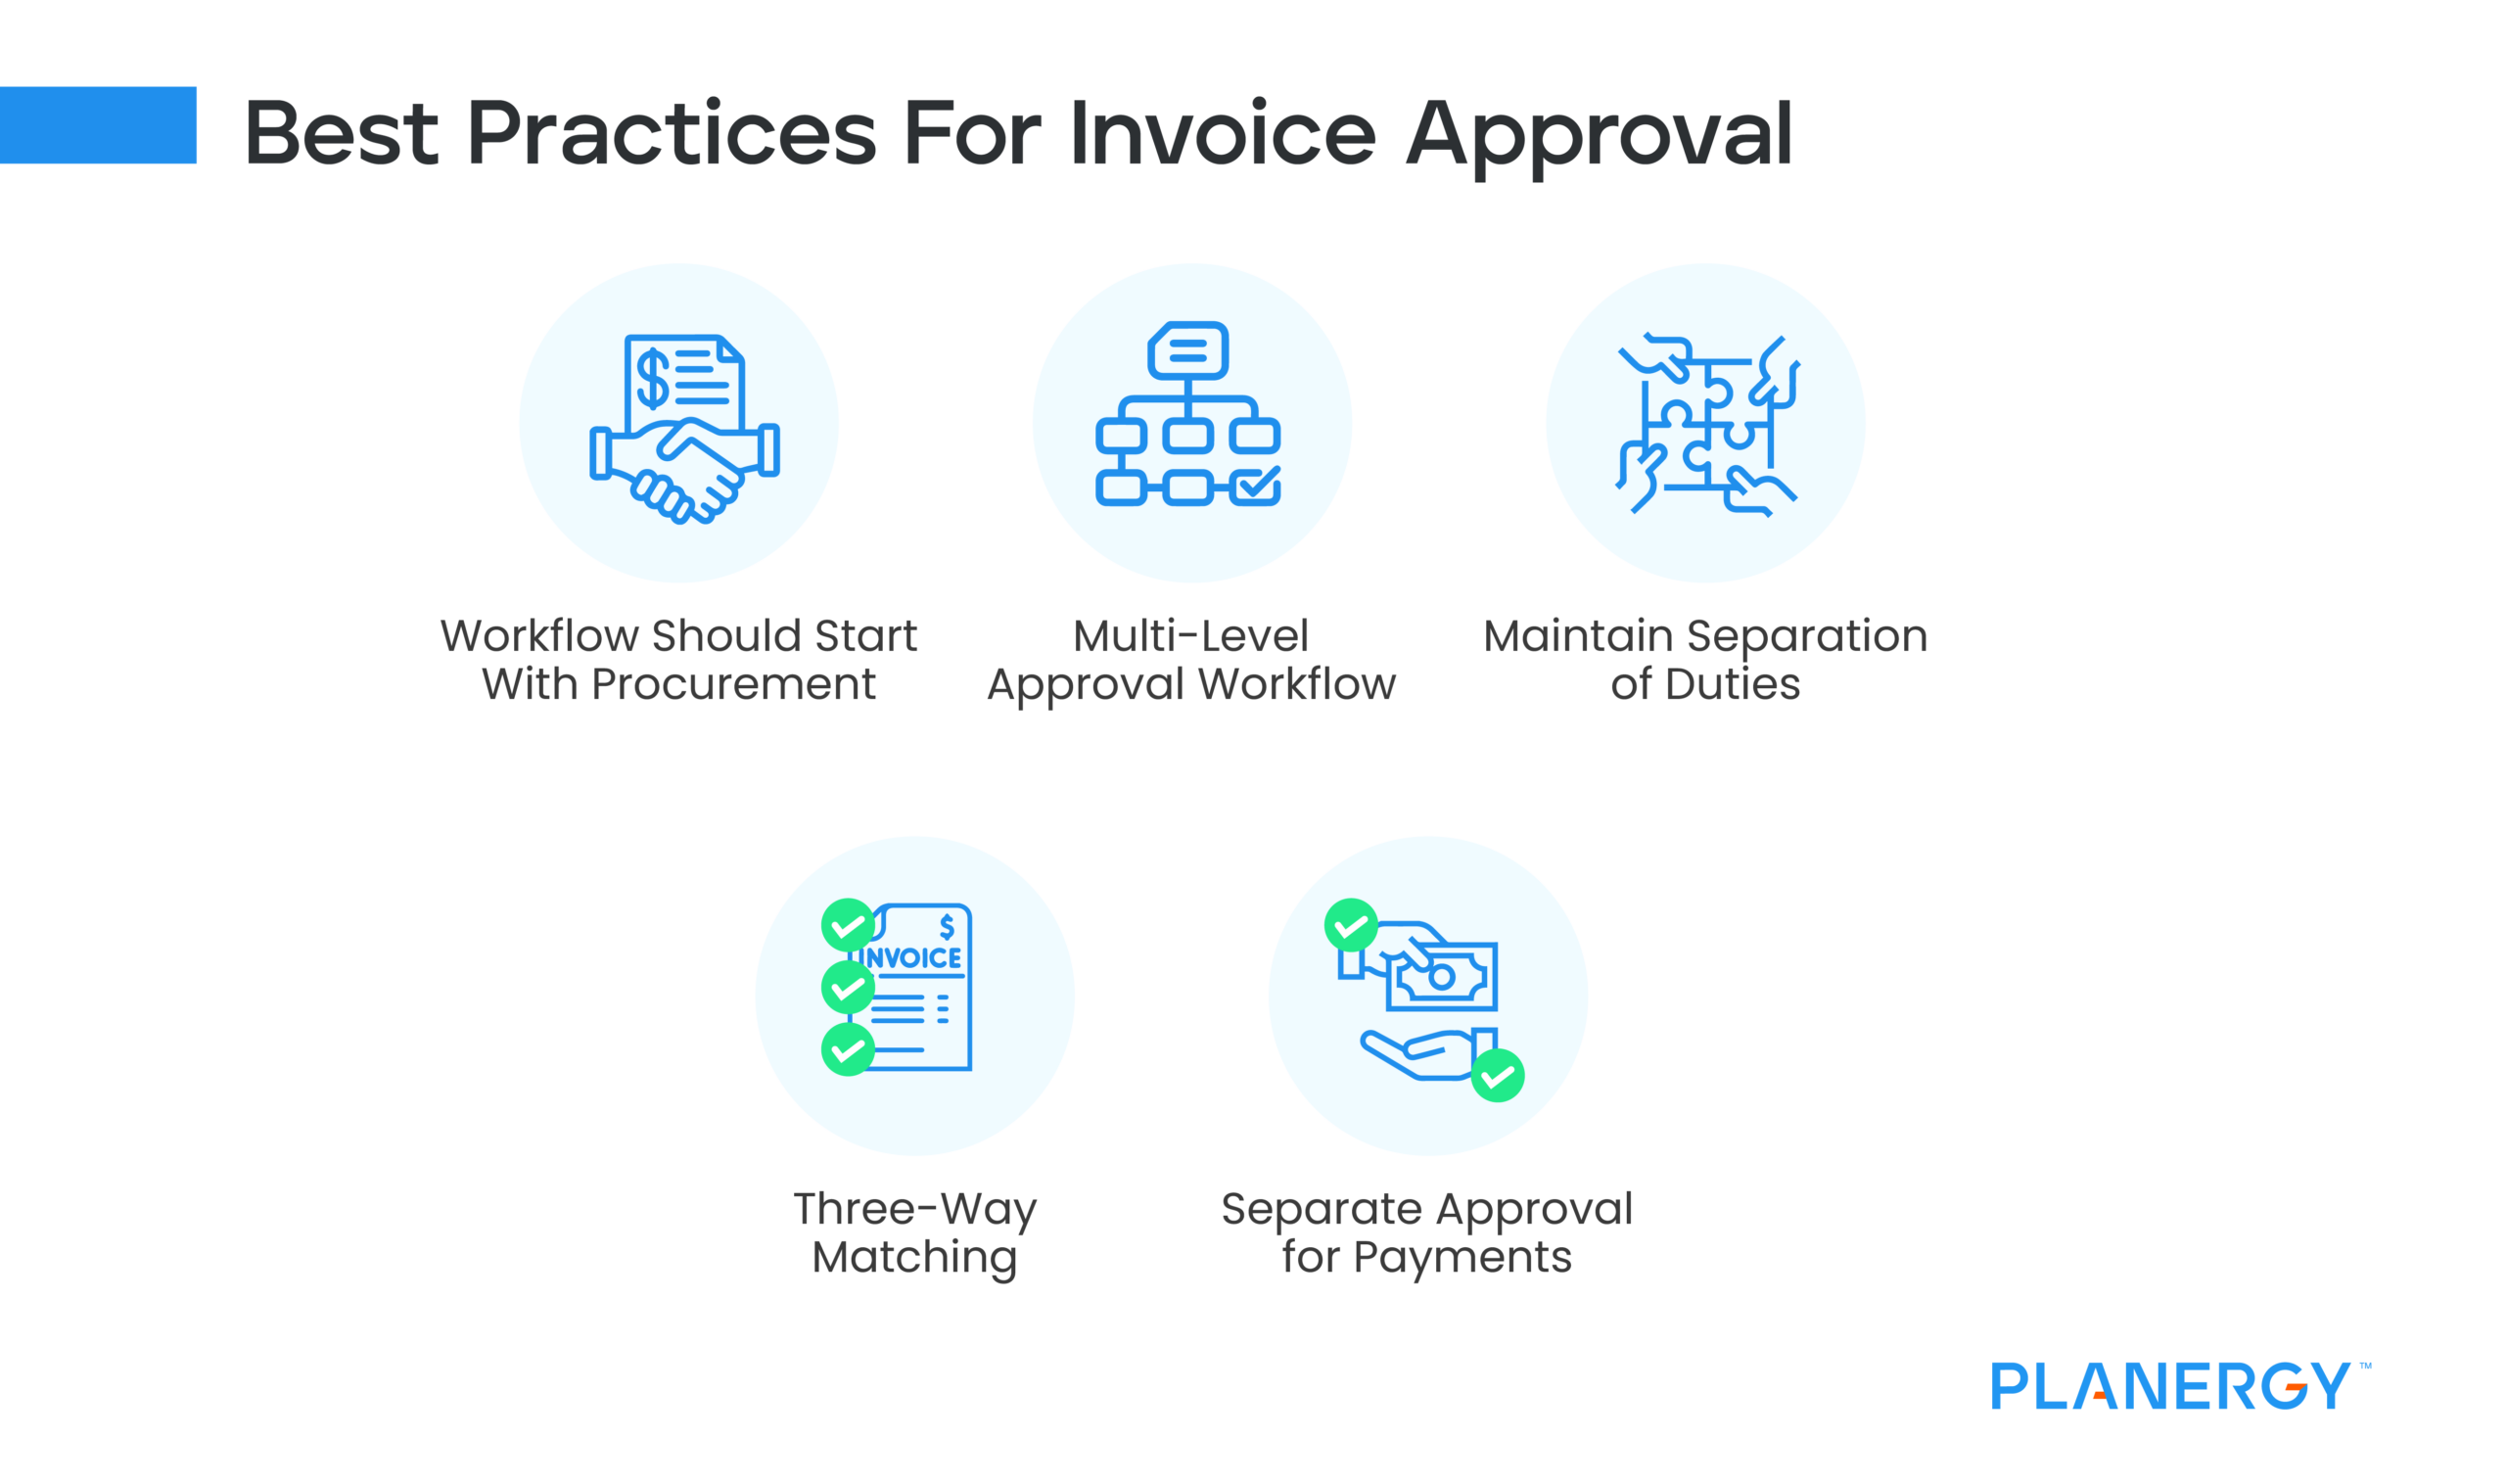 Best Practices for Invoice Approval